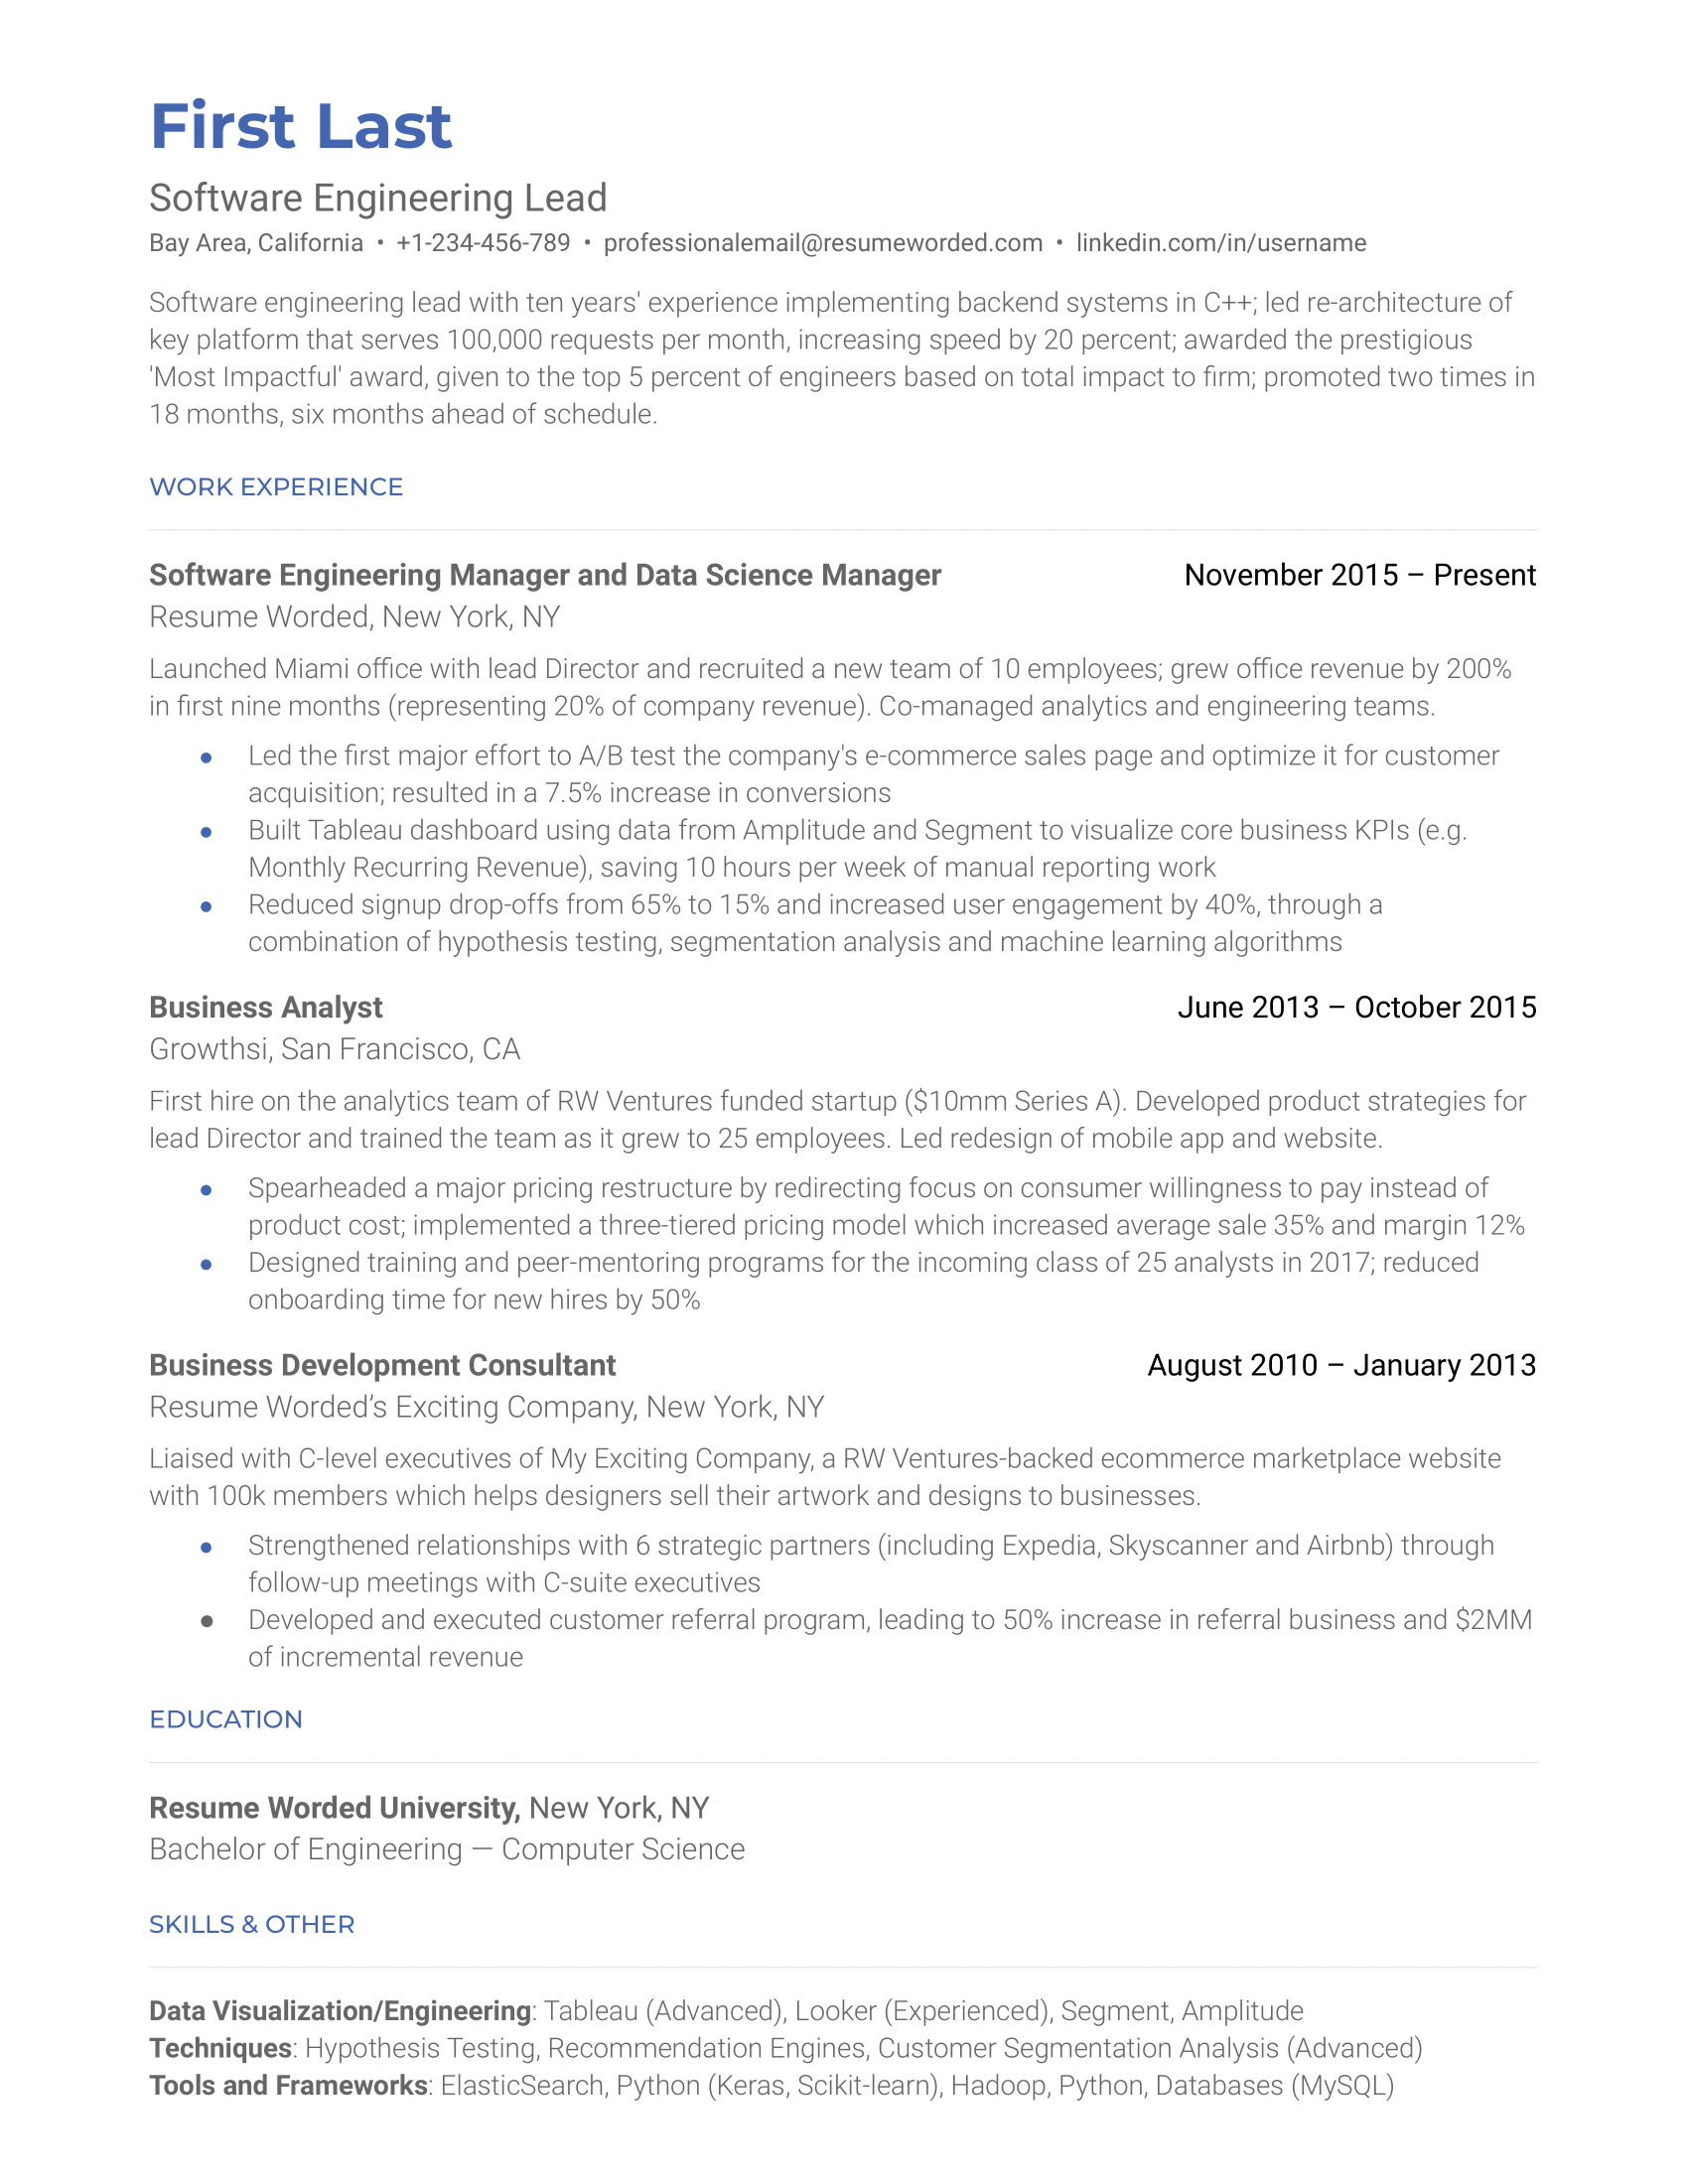 Professional and clean Google docs template effective at getting past resume screeners